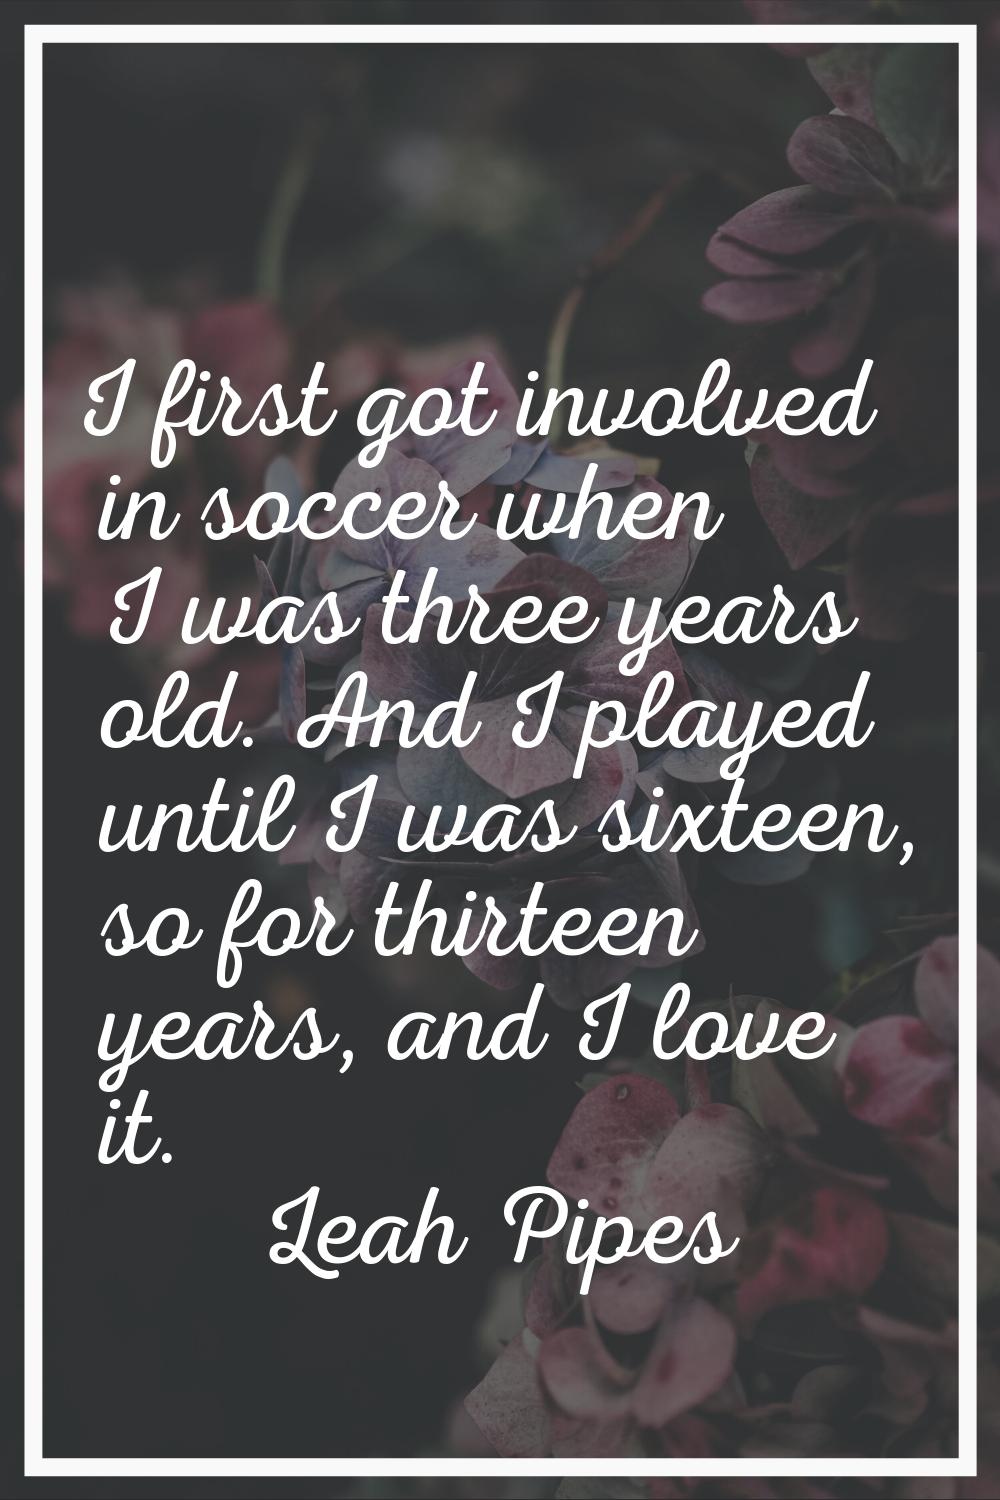 I first got involved in soccer when I was three years old. And I played until I was sixteen, so for